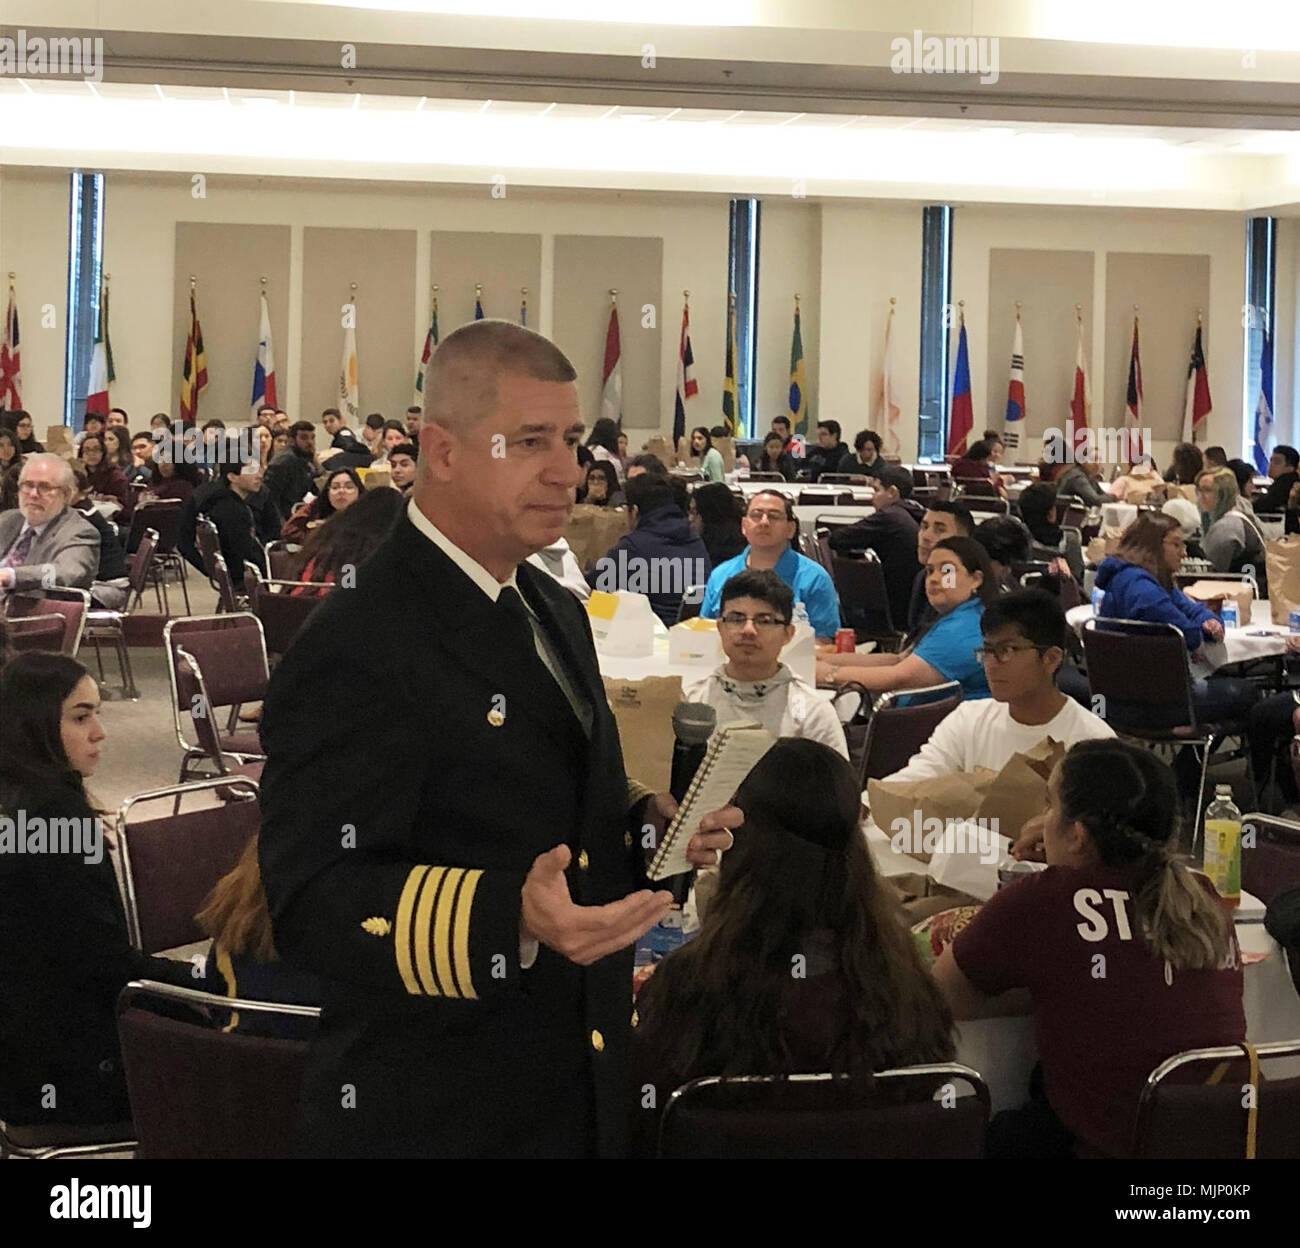 “Think about what ‘you’ want to do with your life and see STEM as an opportunity,” said Navy Capt. Thomas C. Herzig, commanding officer, Naval Medical Research Unit - San Antonio (NAMRU-SA) during a talk to more than 250 high school students at the 8th Annual STEM (Science, Technology, Engineering, and Math) Alliance Symposium luncheon, Feb 22, at Texas A&M International University (TAMIU) in Laredo, Texas. Armed Forces and civilians displaying courage bravery dedication commitment and sacrifice Stock Photo